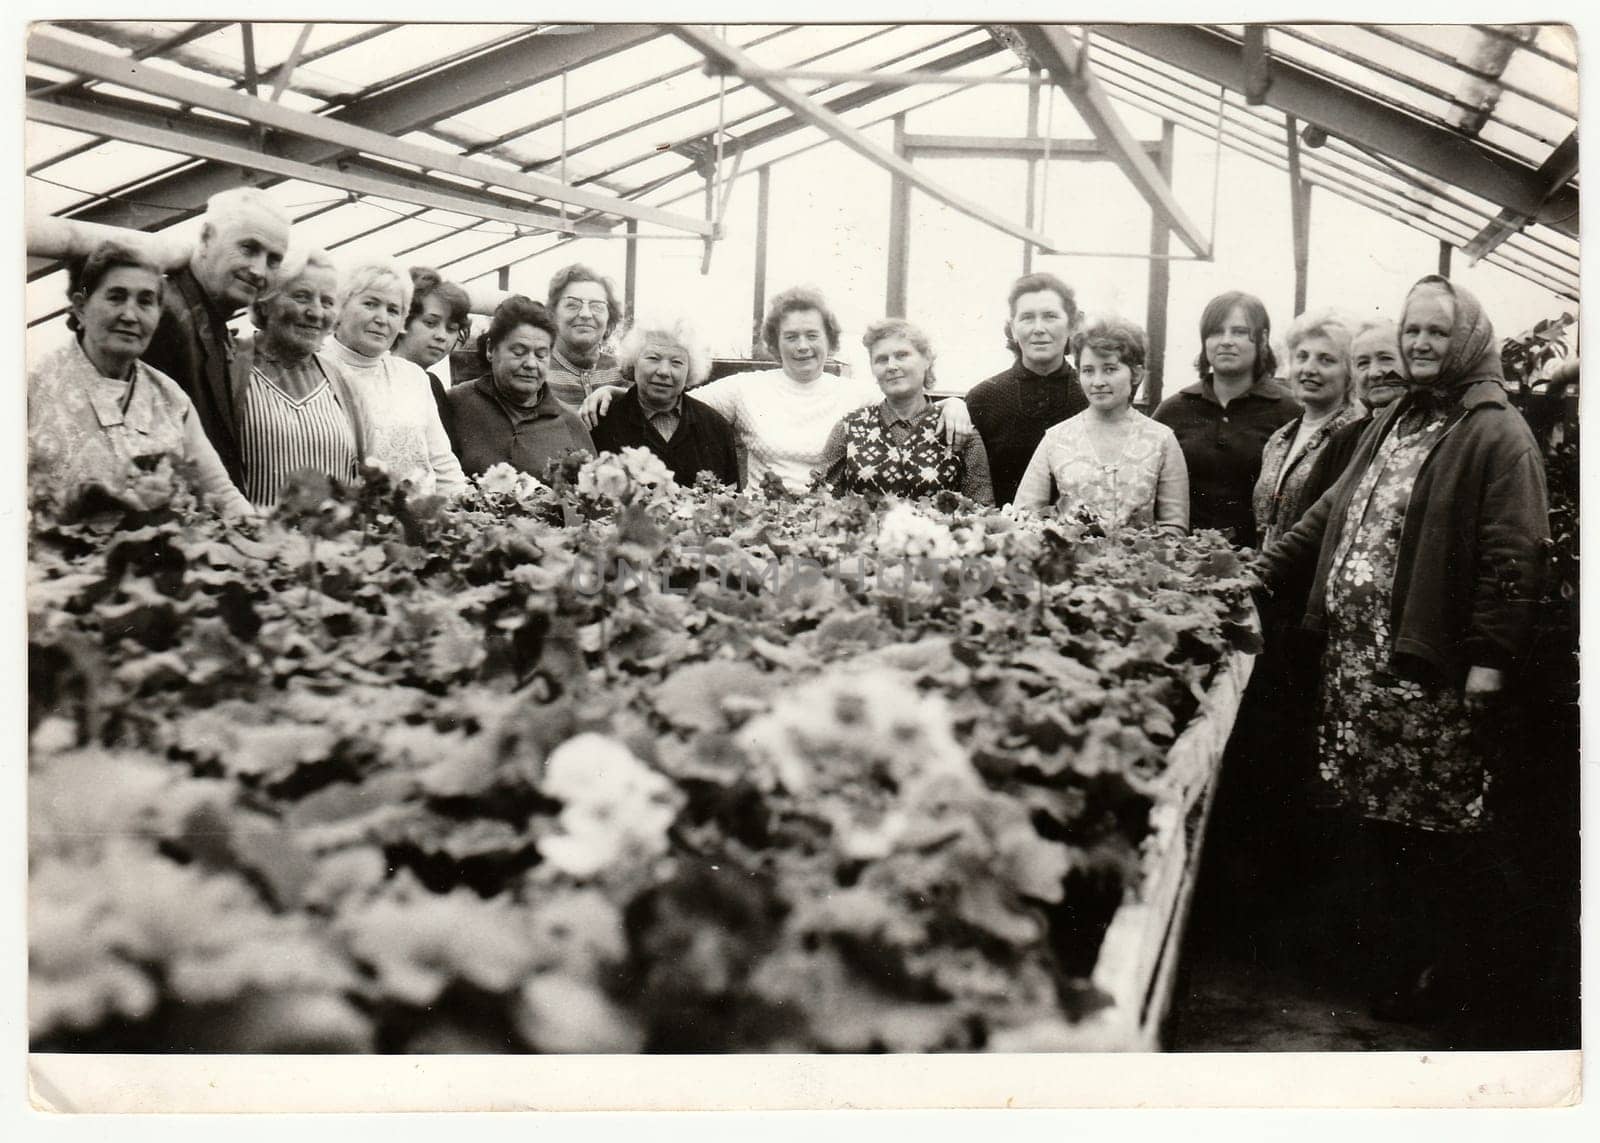 Vintage photo shows farmers in greenhouse. by roman_nerud